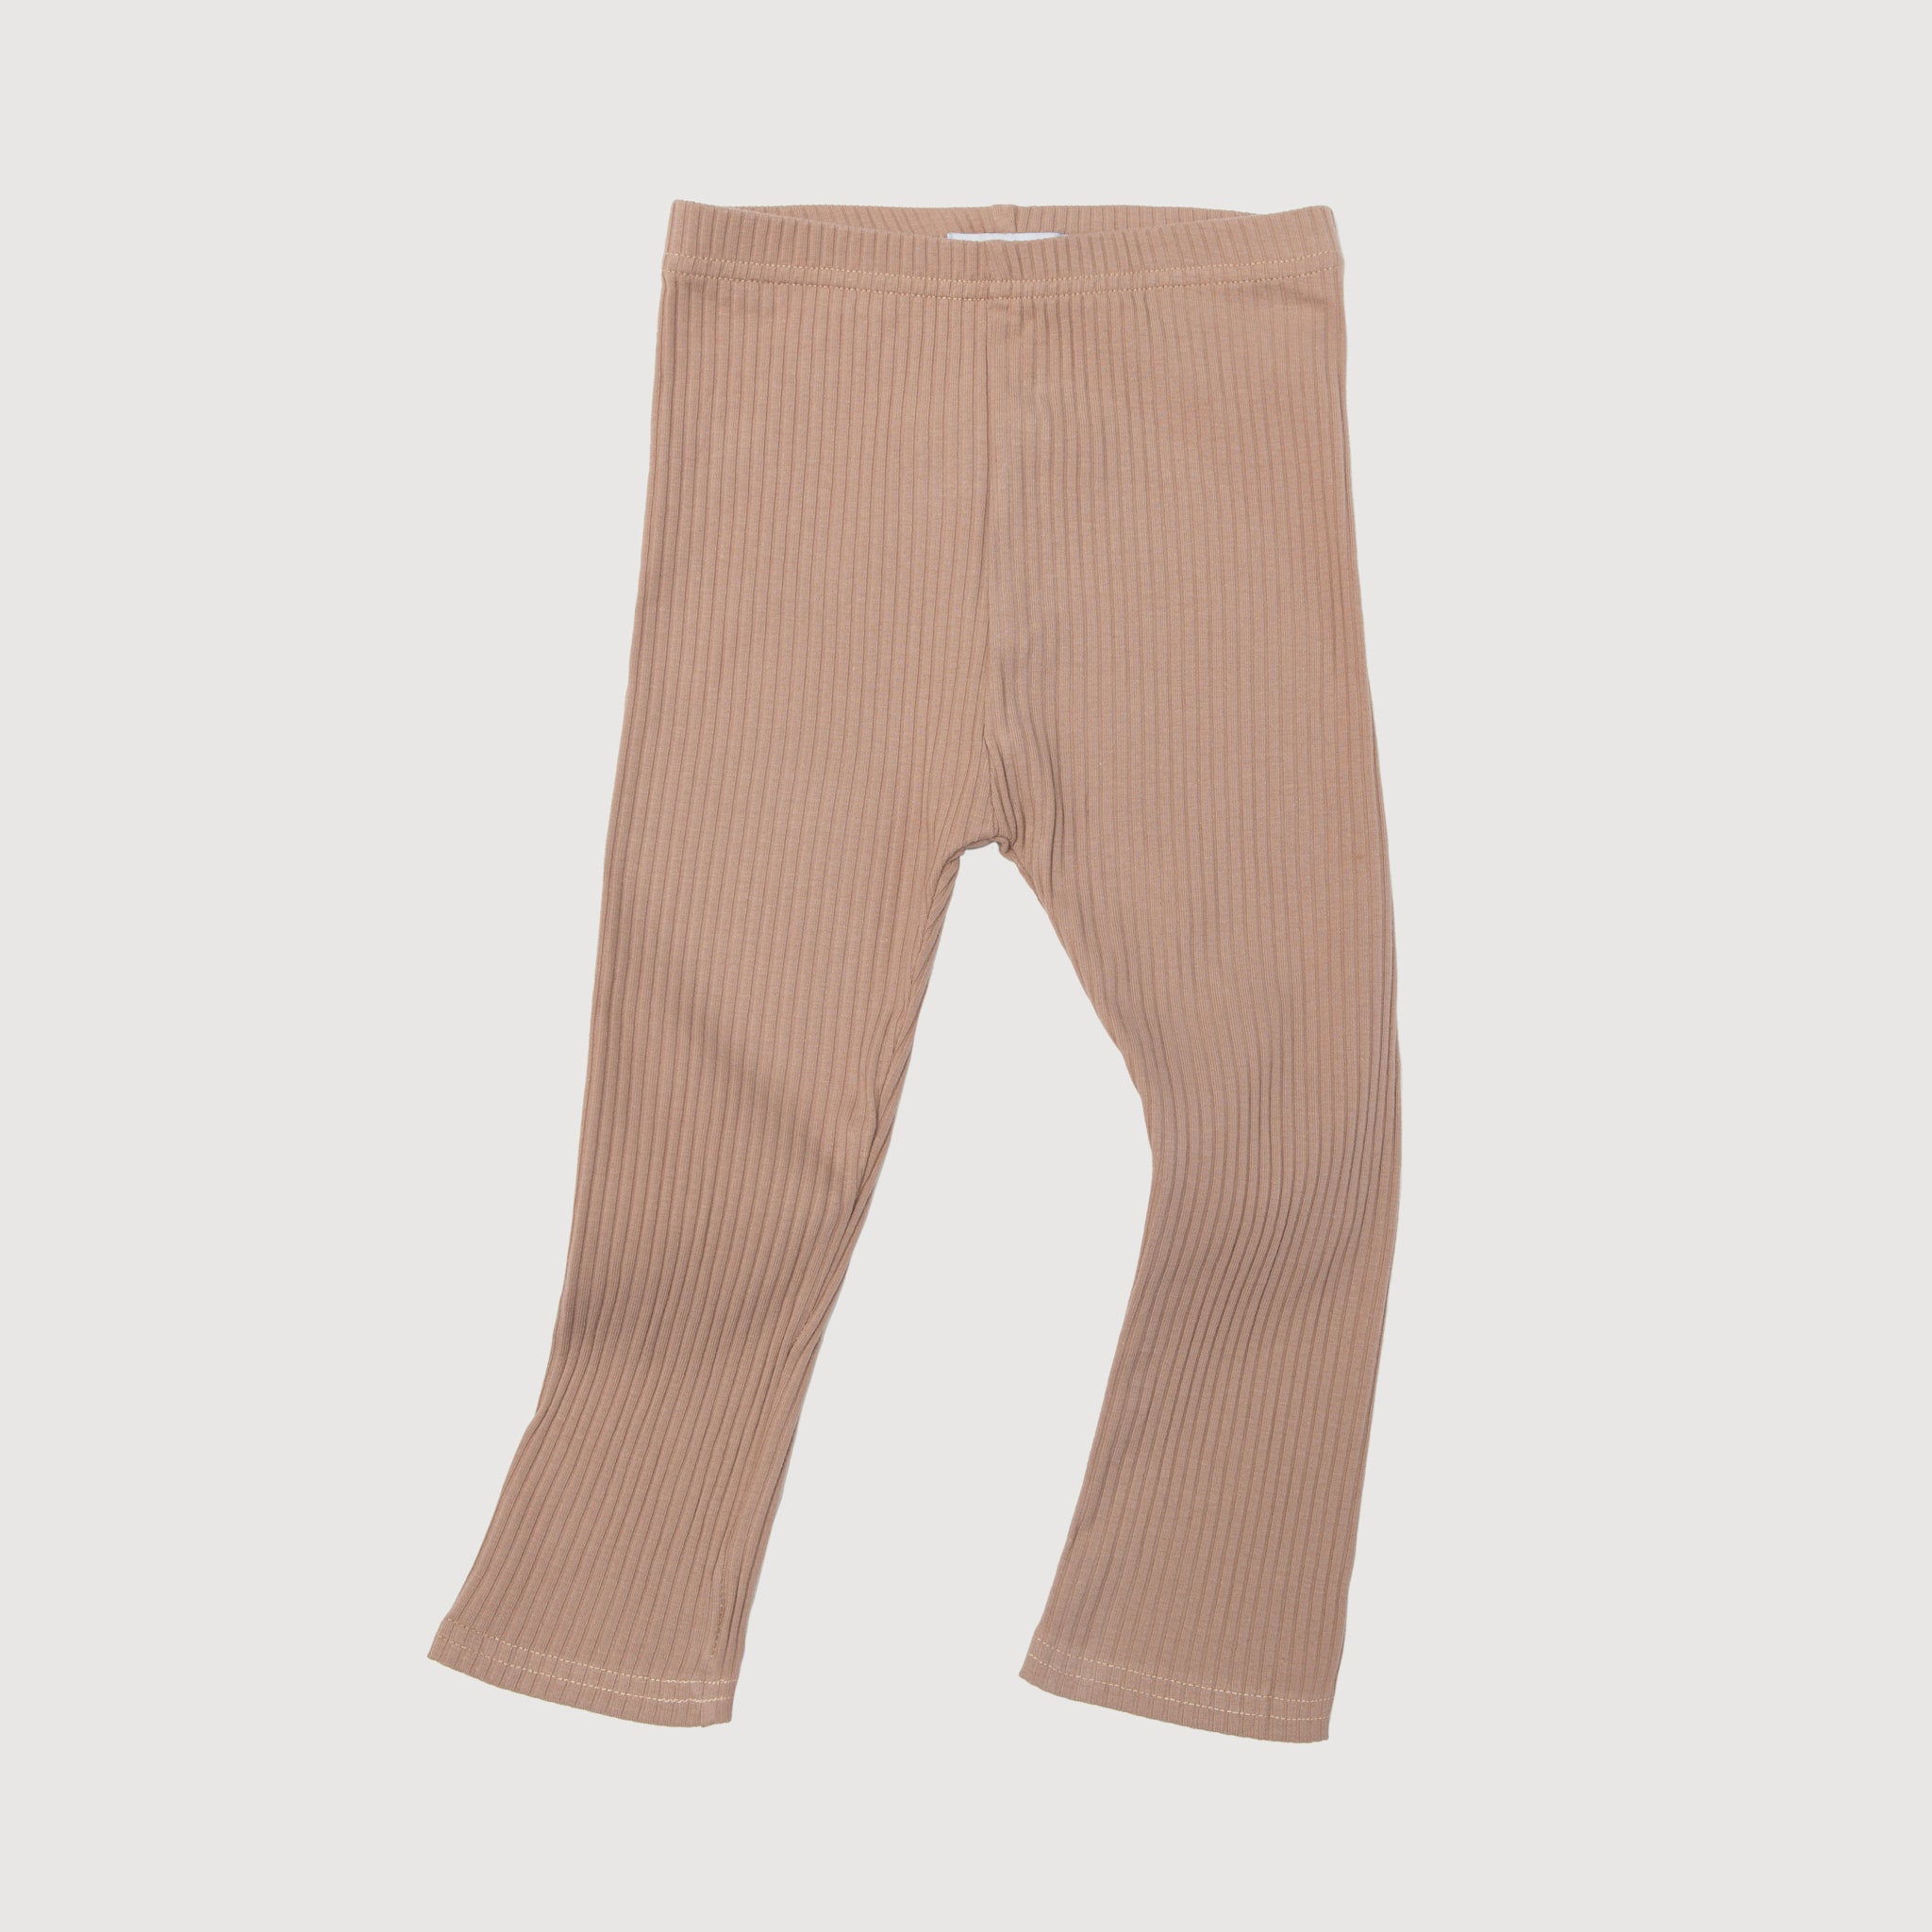 Ribbed Legging - Taupe bel & bow